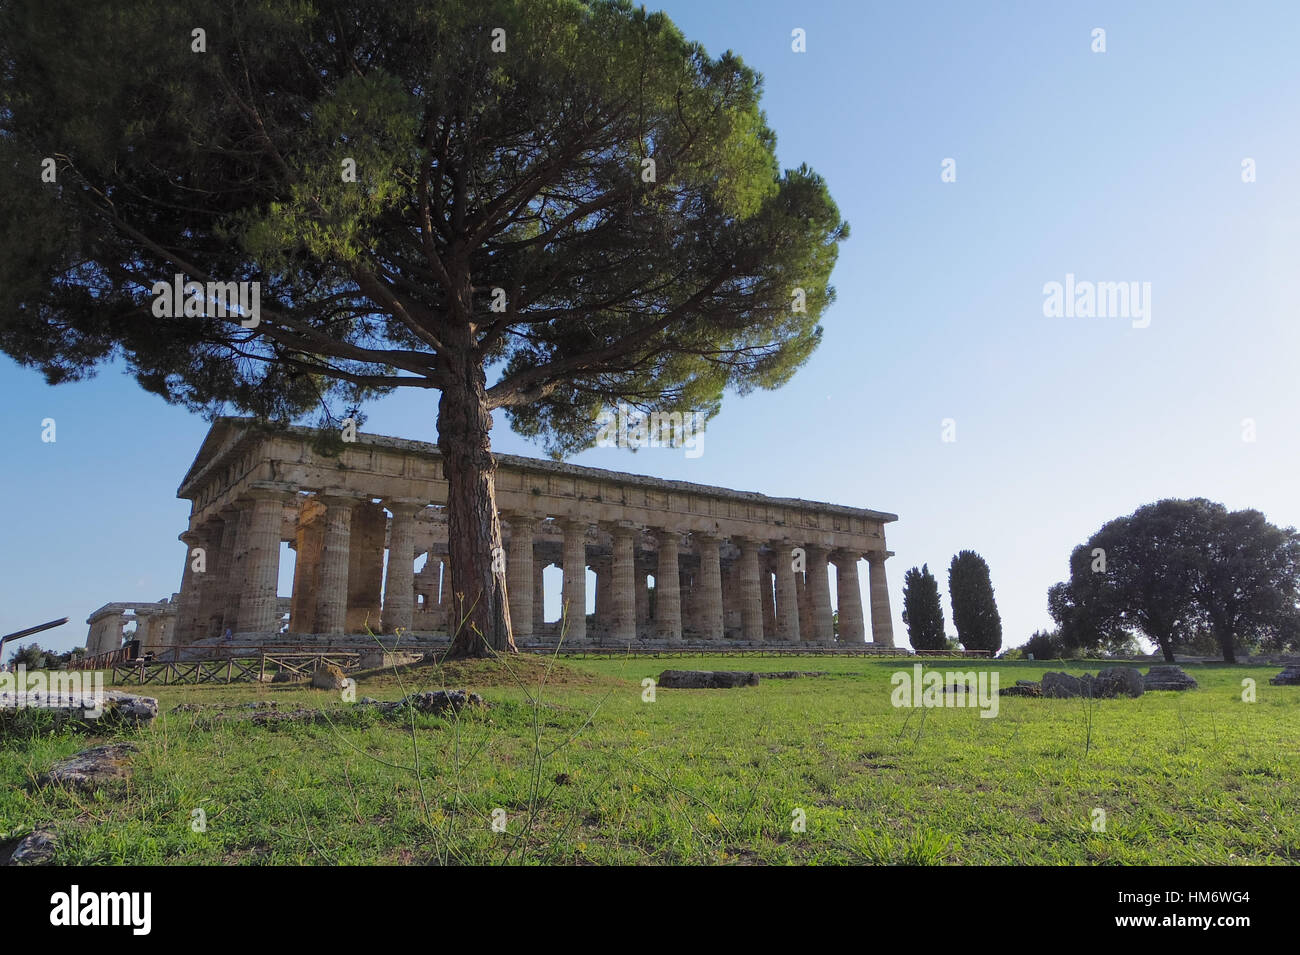 PAESTUM,IT - CIRCA AUGUST, 2015 - Ancient greek temple in Paestum, Italy. Southern Italy was one of the main colonies of ancient Greece. Stock Photo